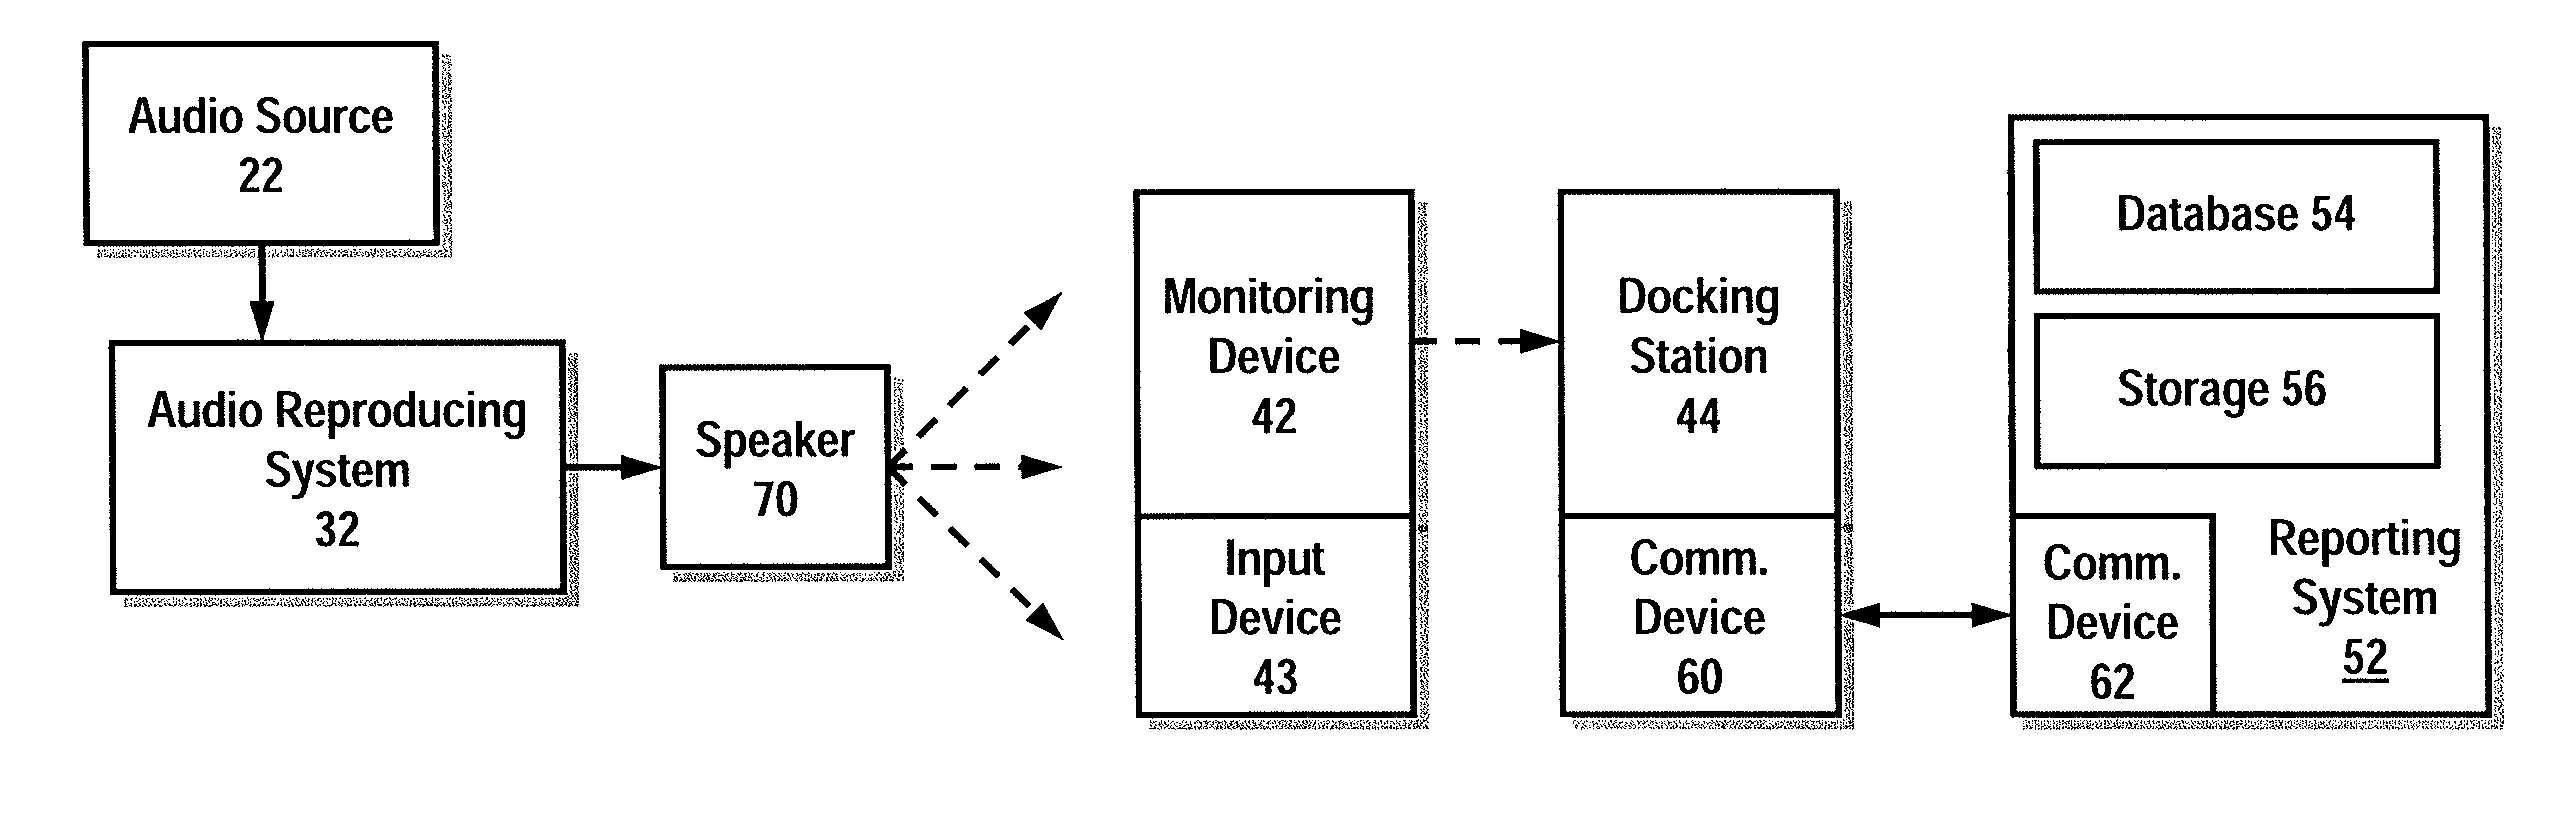 Activating functions in processing devices using encoded audio and detecting audio signatures